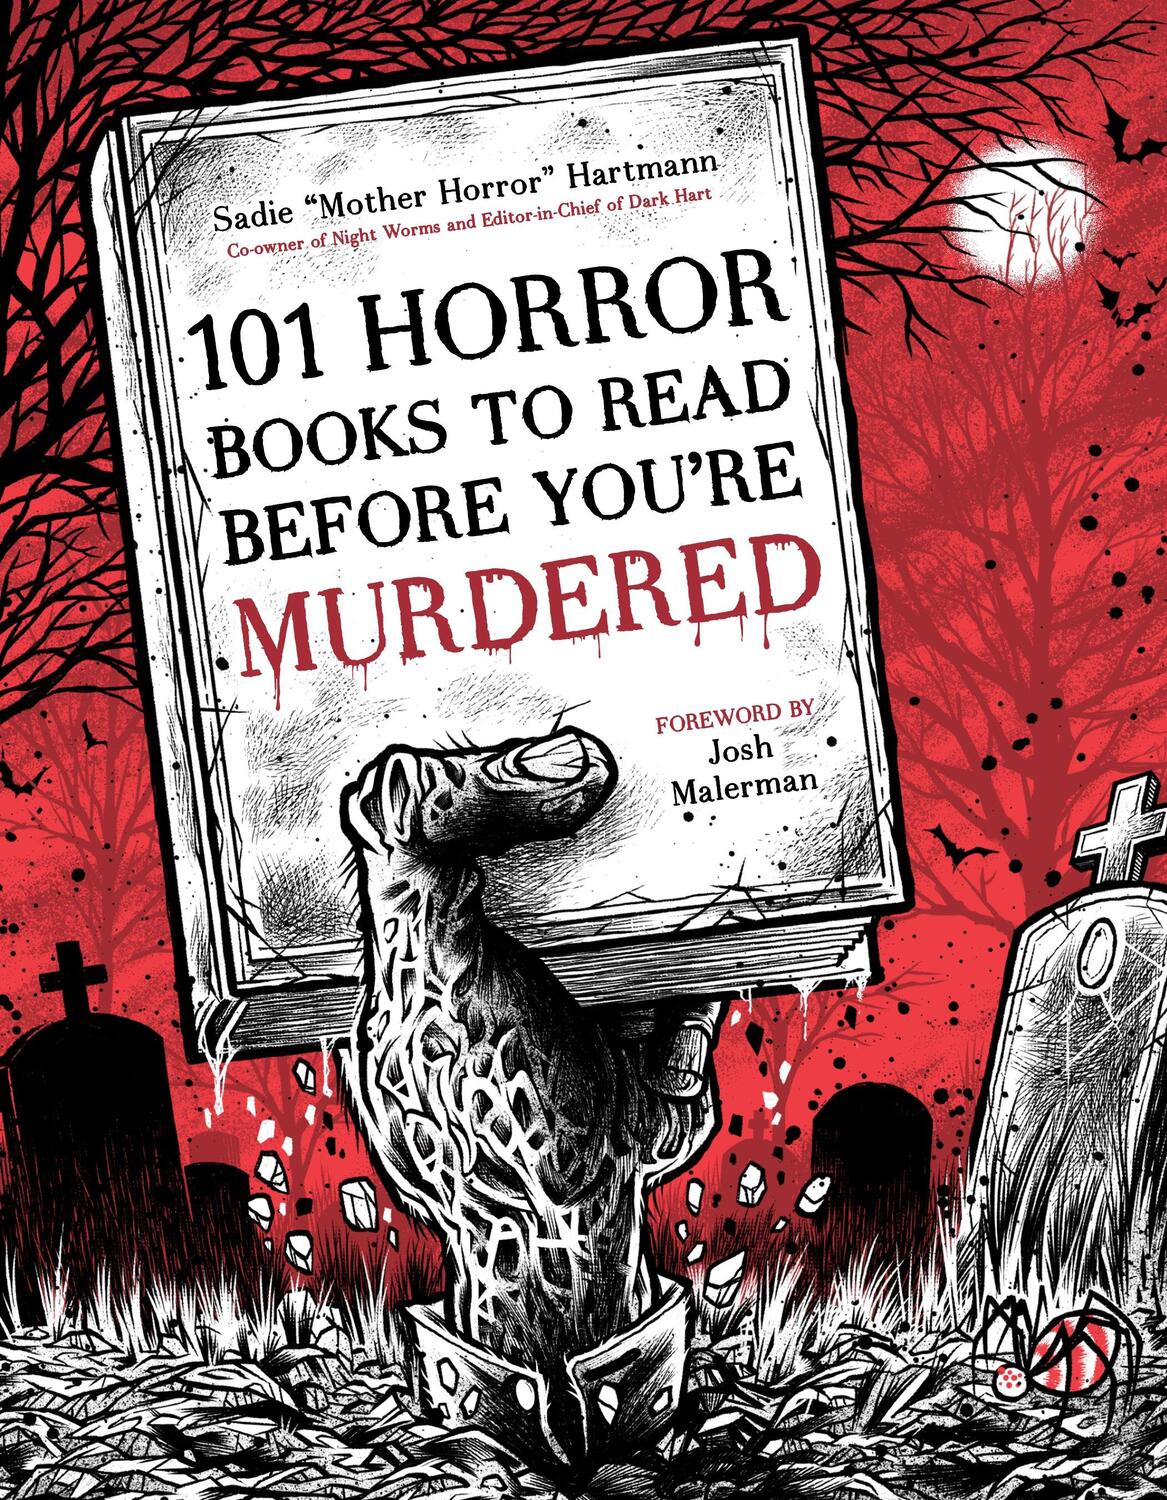 Autor: 9781645677802 | 101 Horror Books to Read Before You're Murdered | Sadie Hartmann